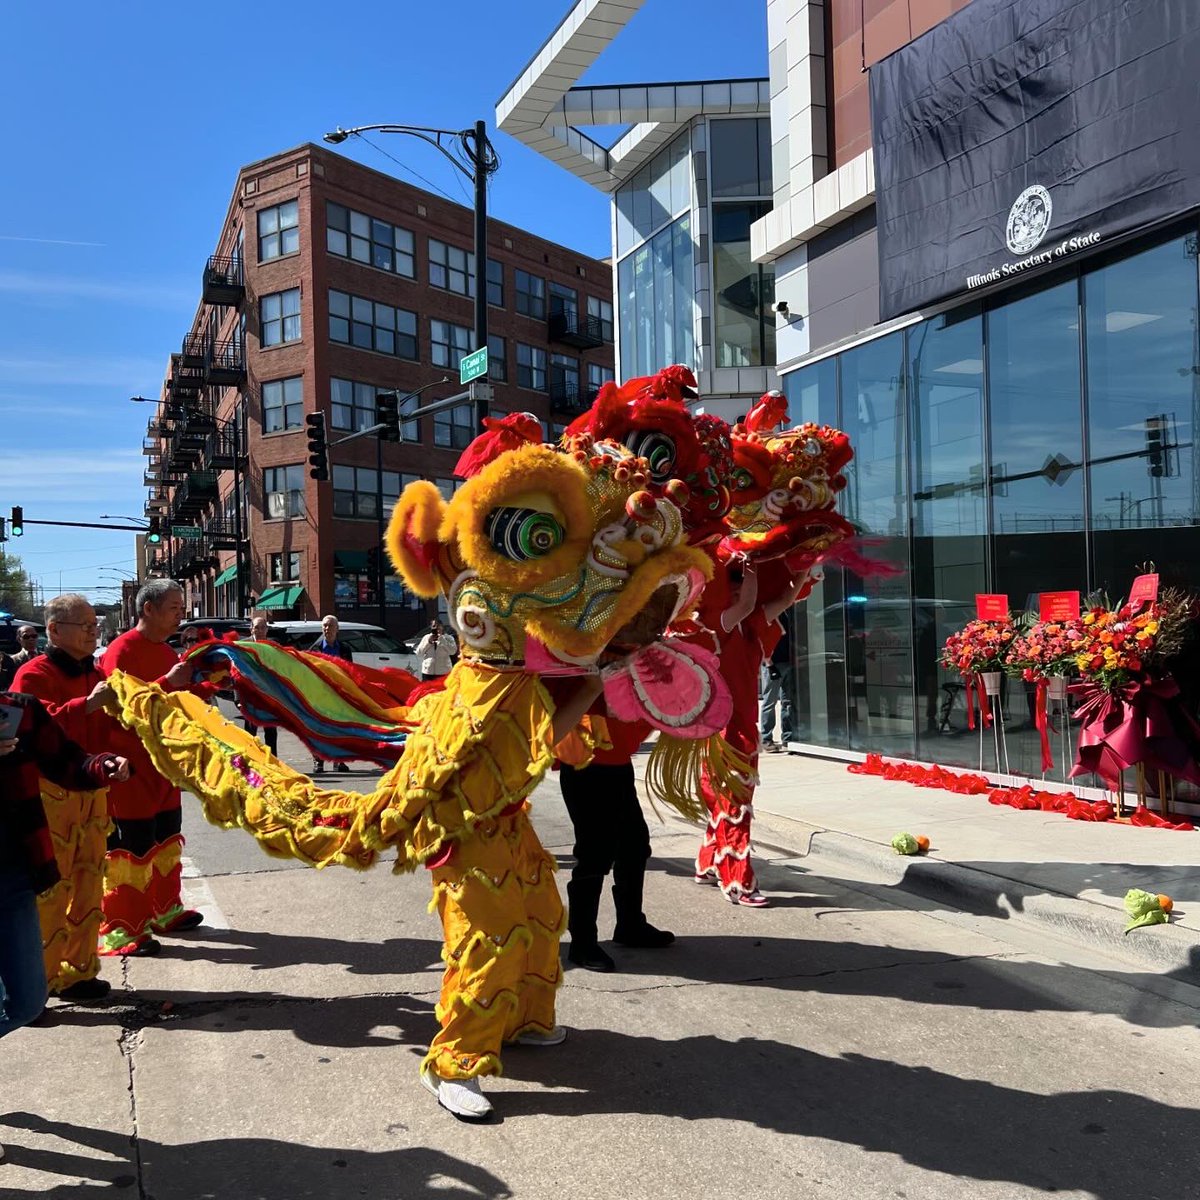 The unveiling of the new Express Drivers and Motor Vehicles Facility (DMV) in Chinatown! With easy access to essential DMV services, reduced travel time, and language support. Walk-in 2250 S. Canal St. 8am - 5:30pm, Mon-Fri For more information, call 312-793-1010 @ILSecOfState